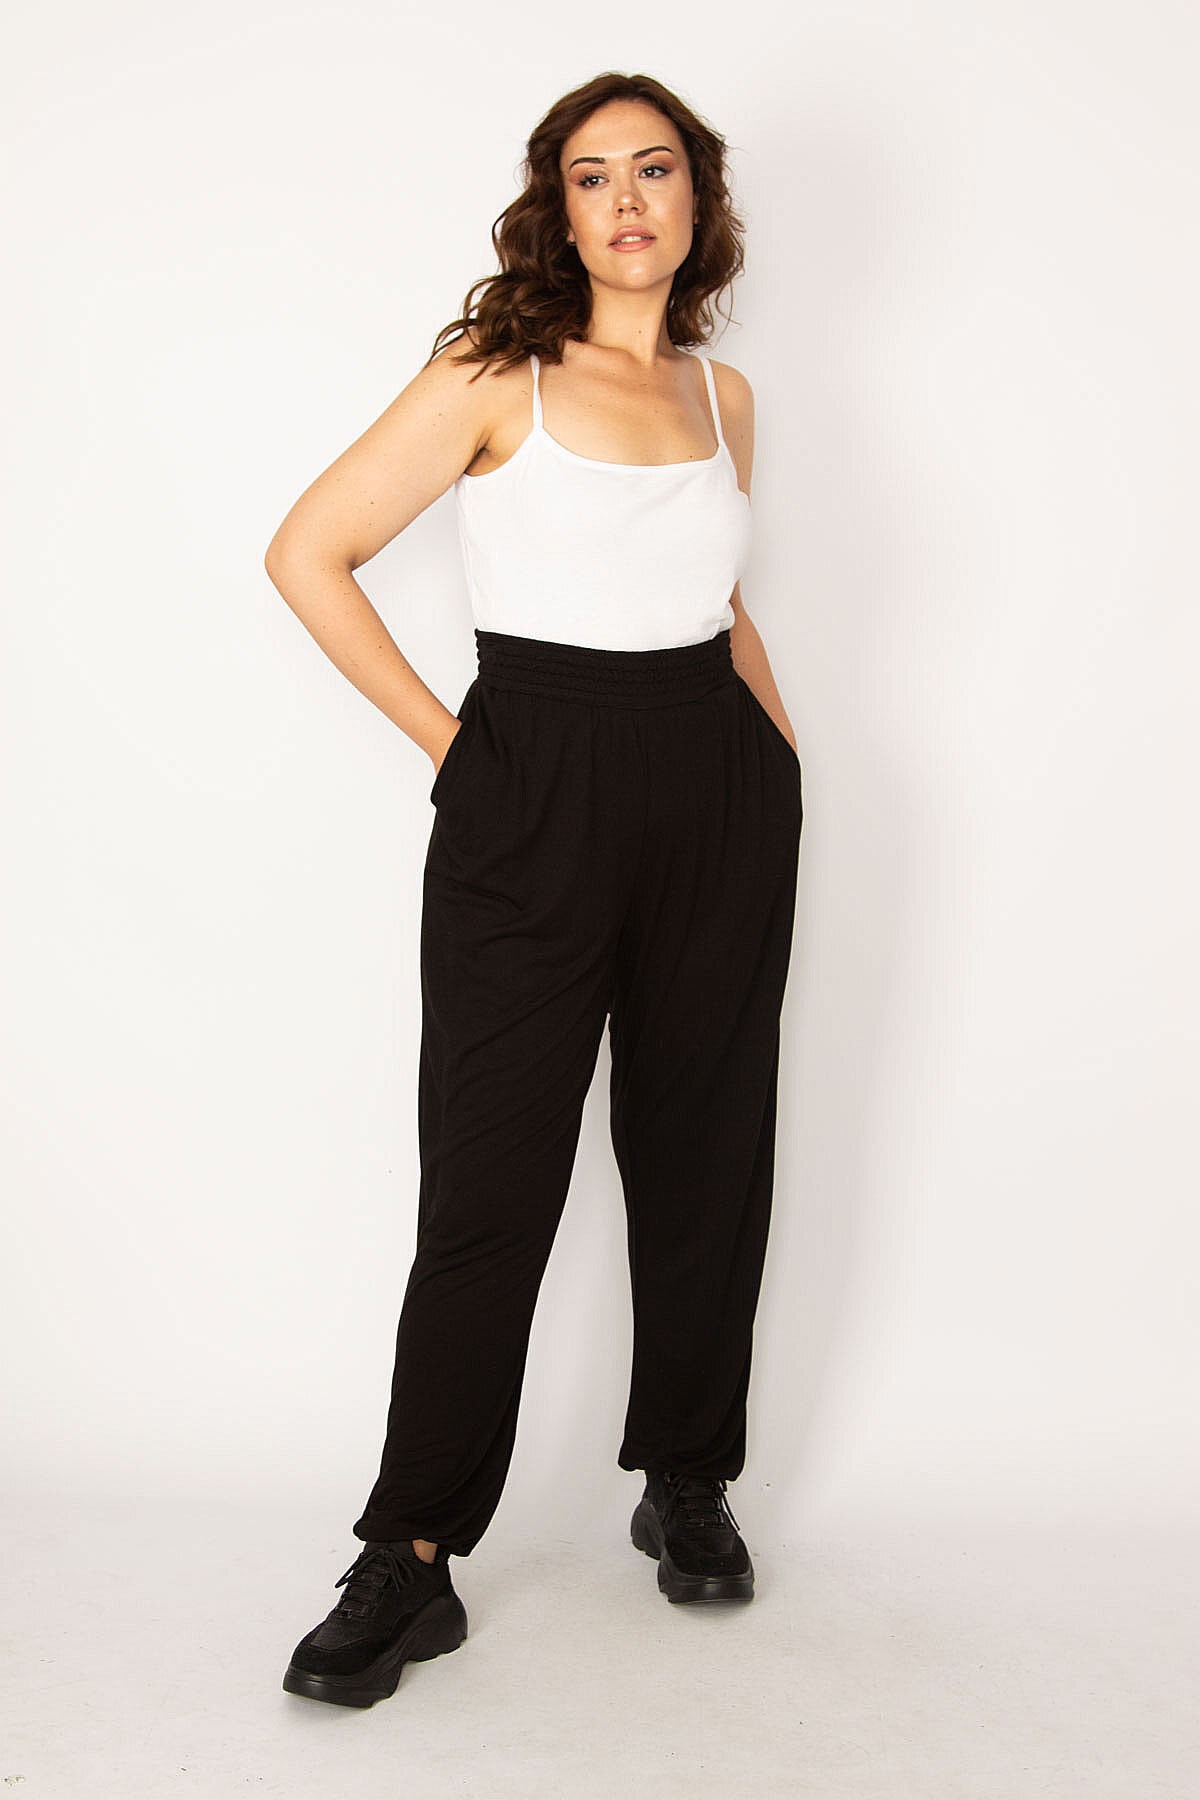 Levně Şans Women's Plus Size Black Sport Trousers with Elastic Waist and Legs, and a comfortable cut with pockets